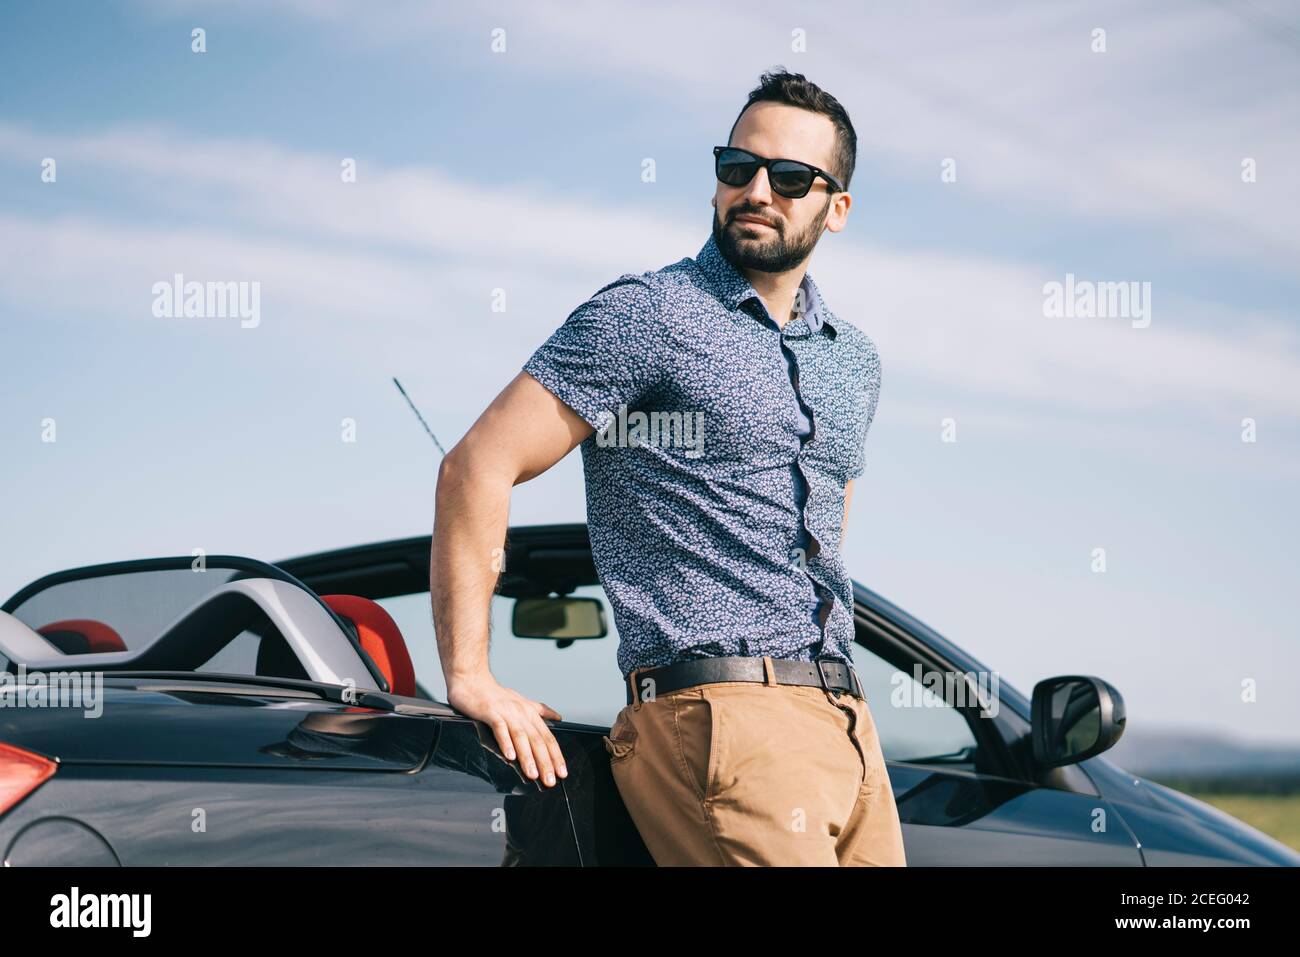 Attractive man posing in convertible car Stock Photo - Alamy